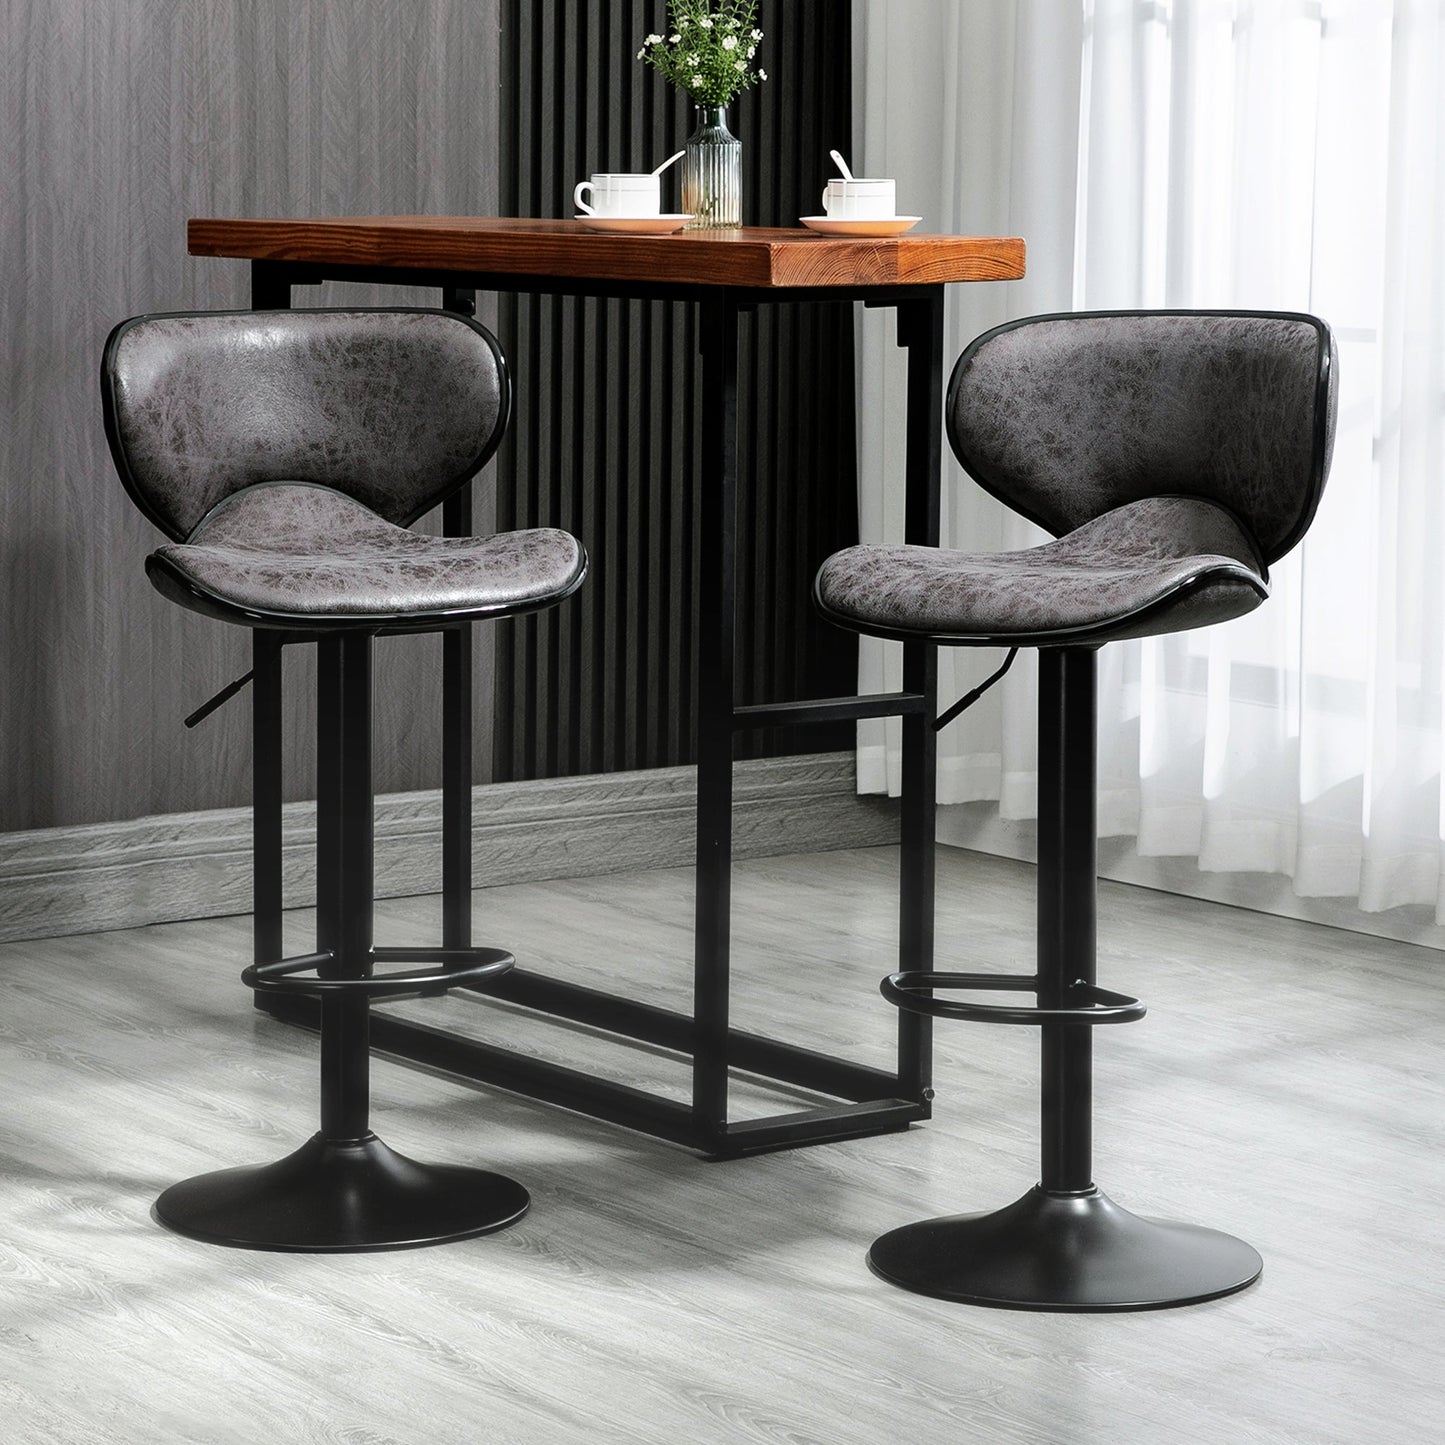 Vintage Bar Stools Set of 2, Microfiber Cloth Adjustable Height Armless Chairs with Swivel Seat, Dark Grey - Gallery Canada